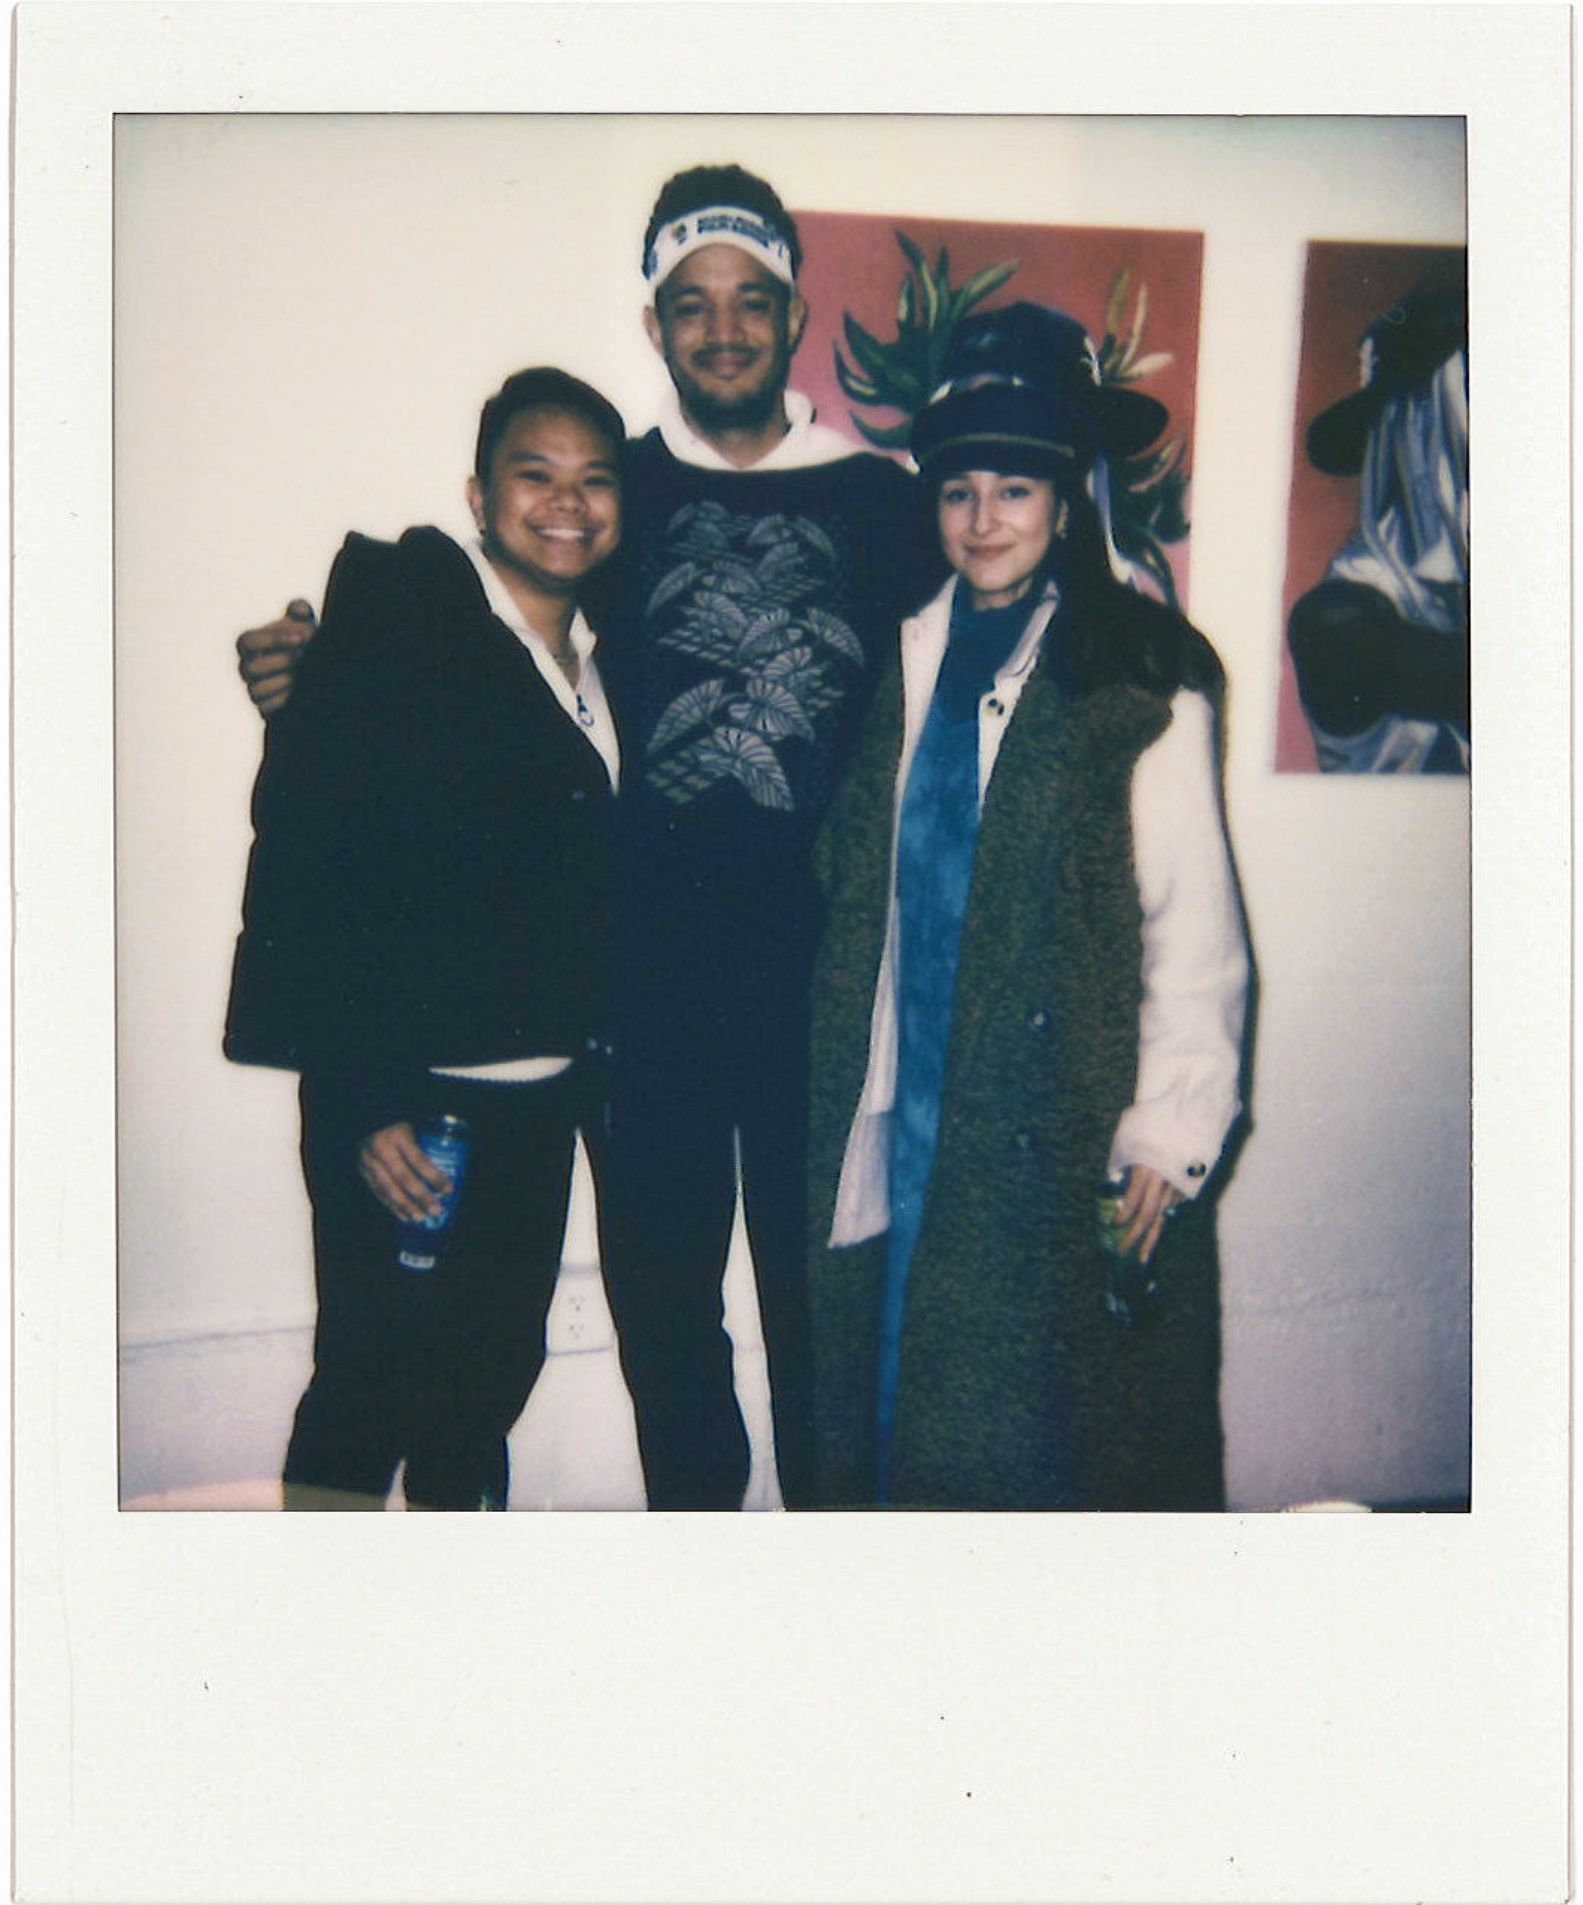 Polaroid of three people with arms around each other and smiling pose in front of art gallery wall